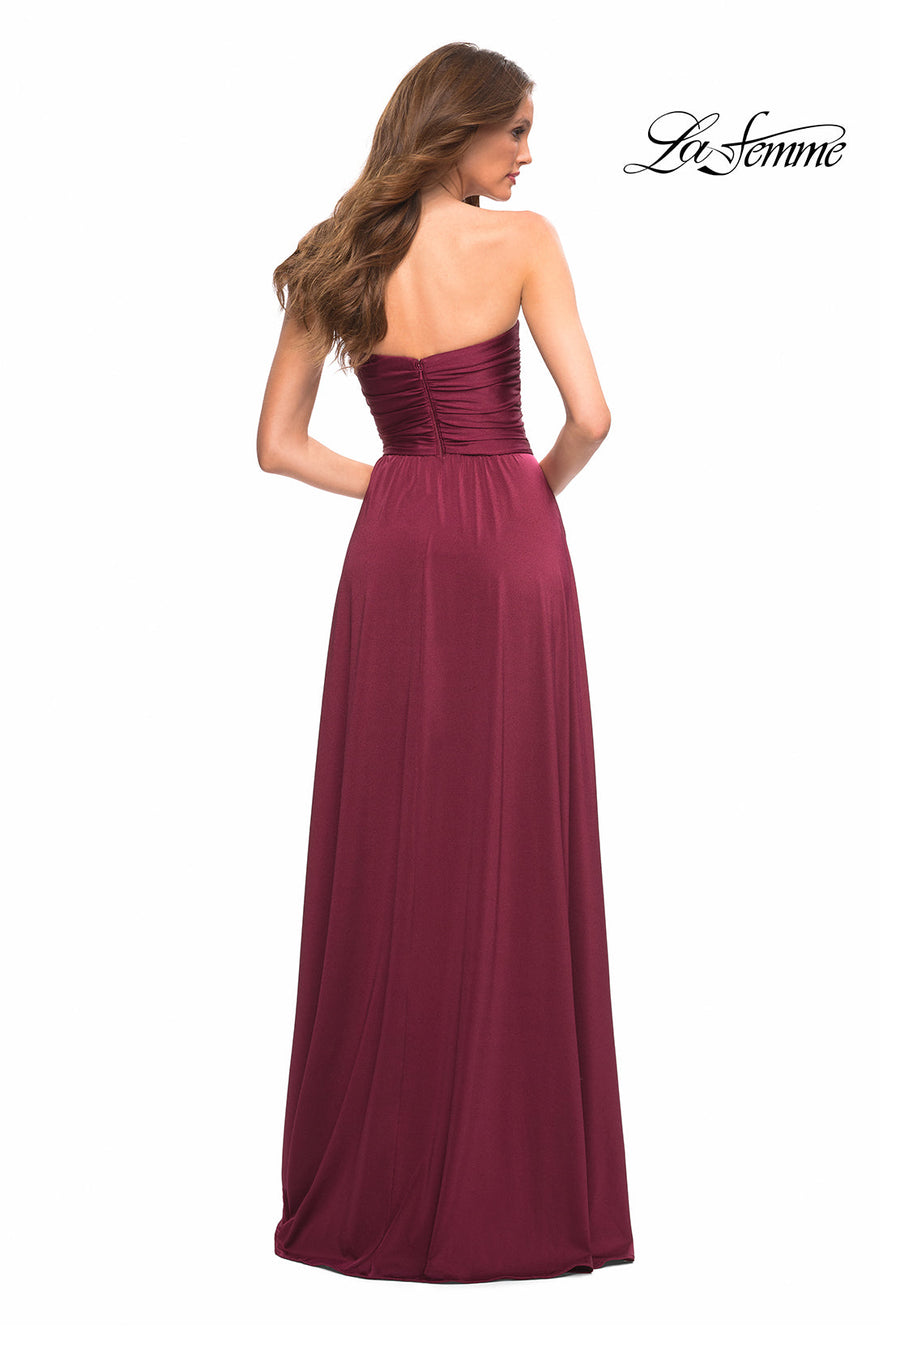 La Femme 30700 prom dress images.  La Femme 30700 is available in these colors: Dark Berry, Light Gold, Mauve, Navy, Silver.